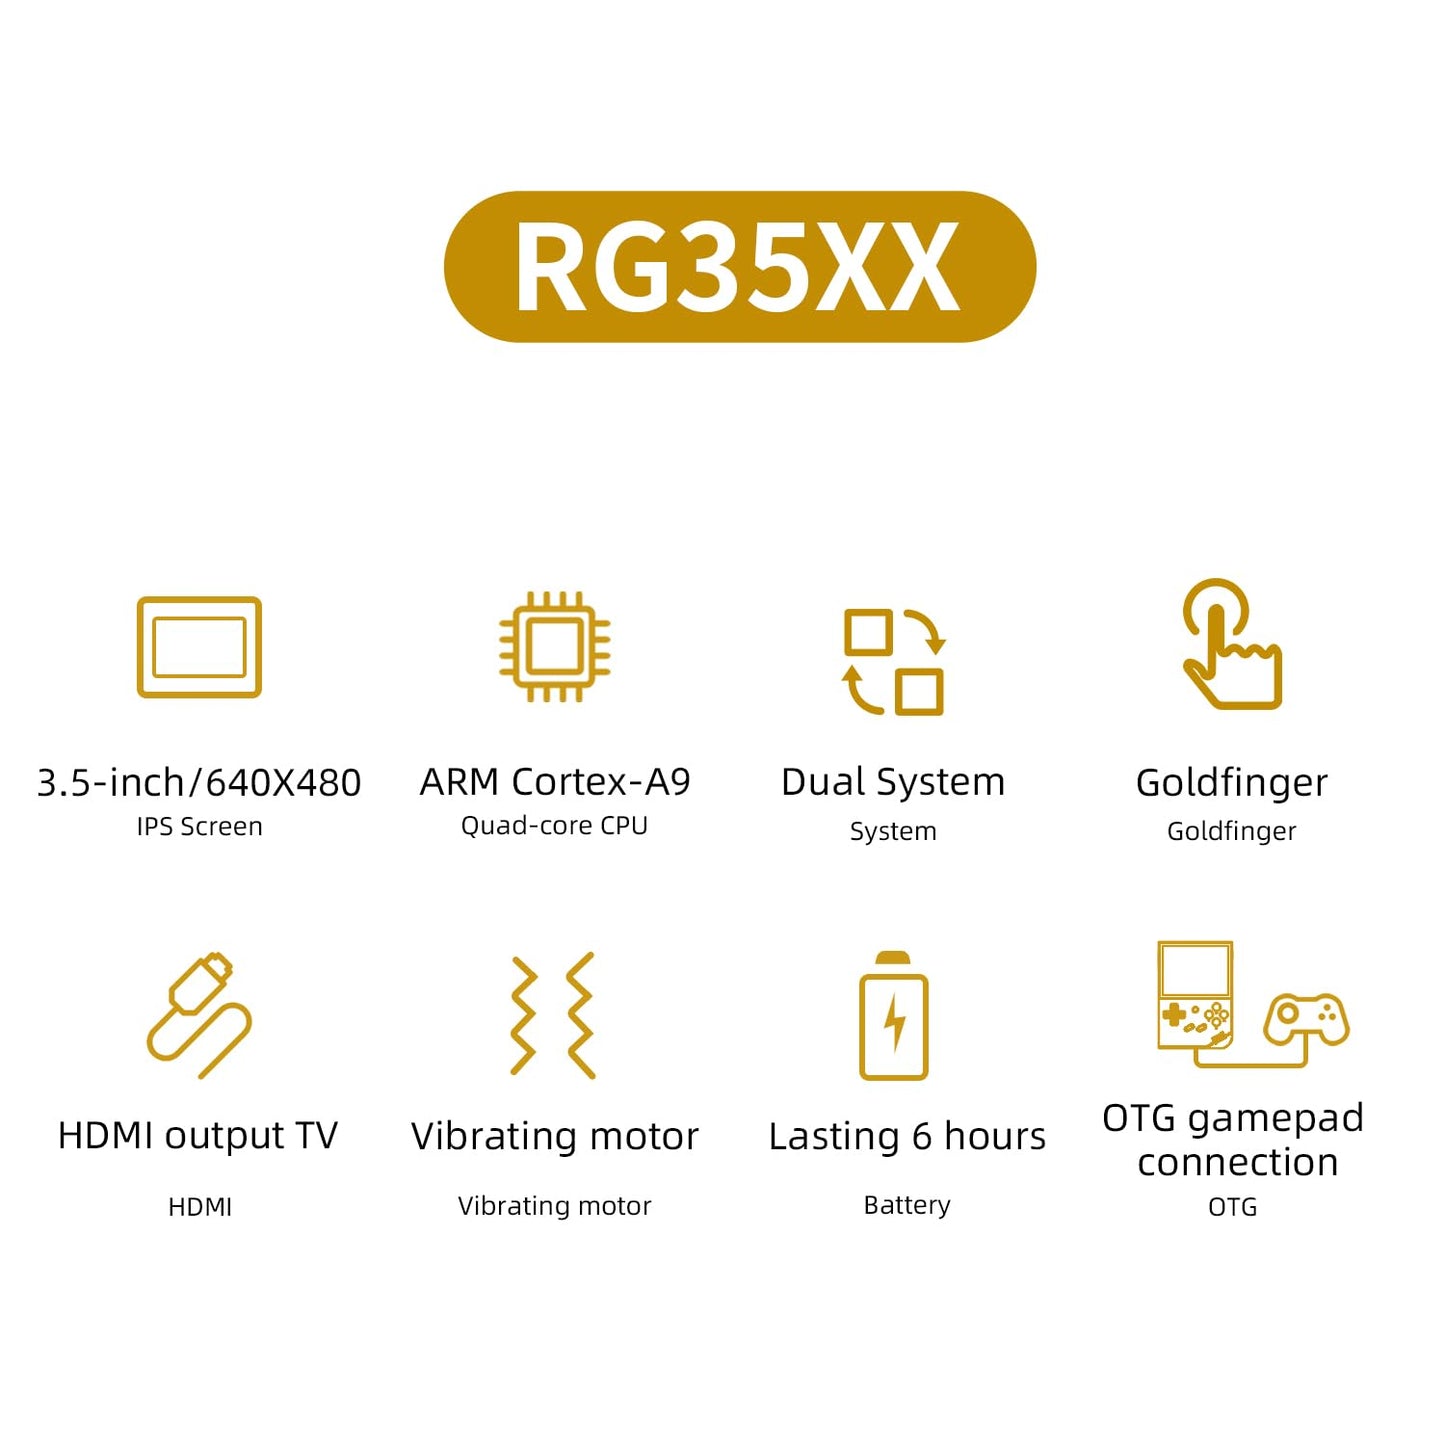 RG35XX Dual OS Retro Handheld Game Console Linux Garlic 64G TF Card Built-in 6831 Classic Games 3.5 inches IPS Screen Pocket Video Game Console Plug and Play Games with Storage Bag